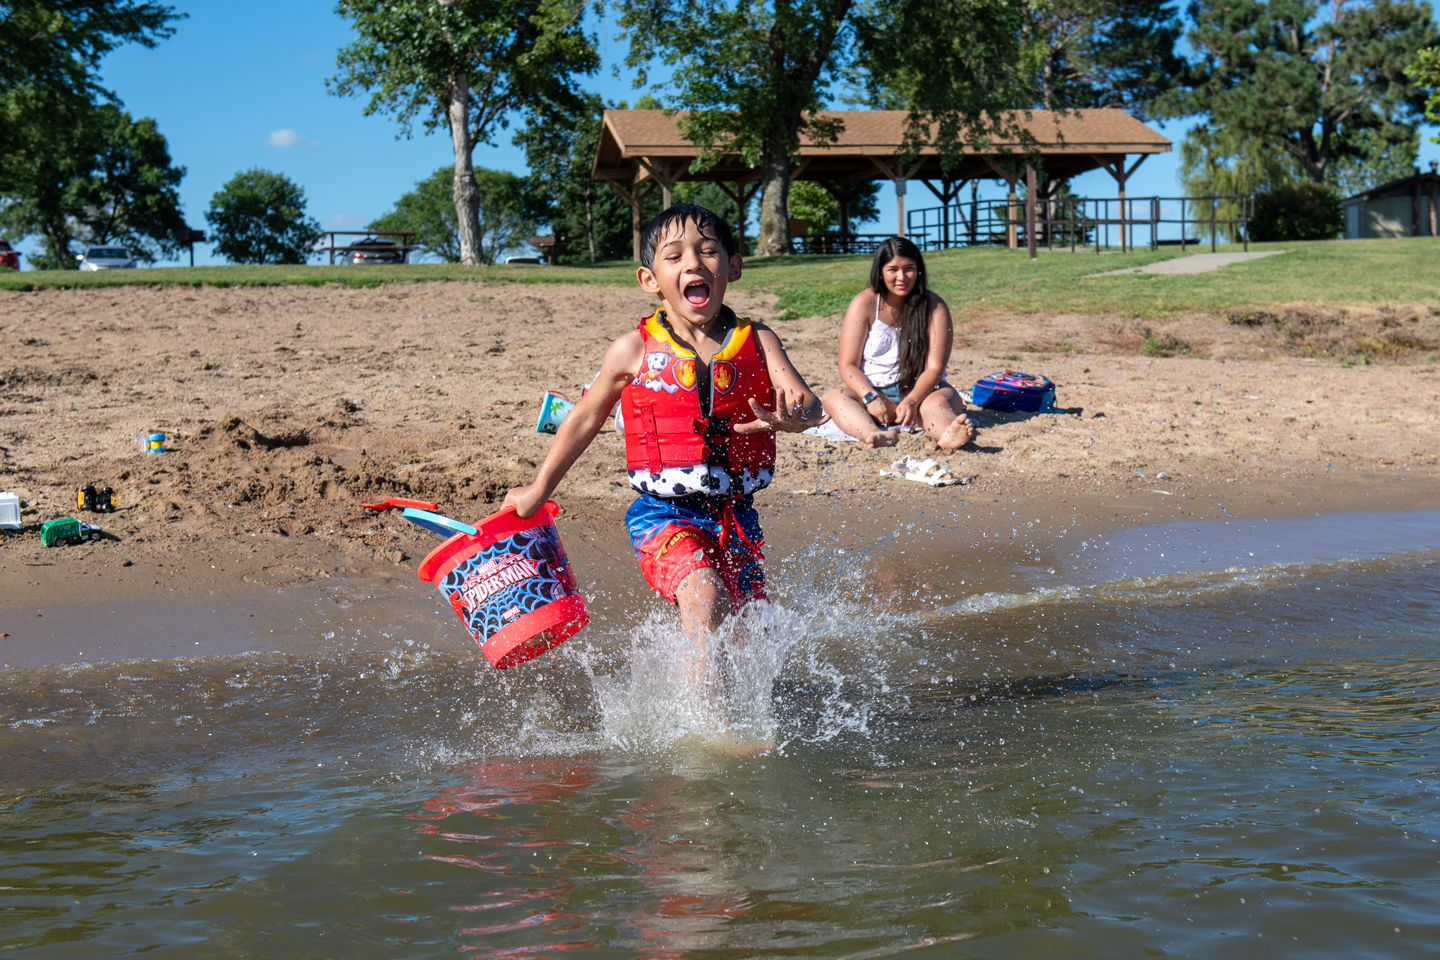 A small boy wearing a lifejacket runs into the lake carrying a sand bucket